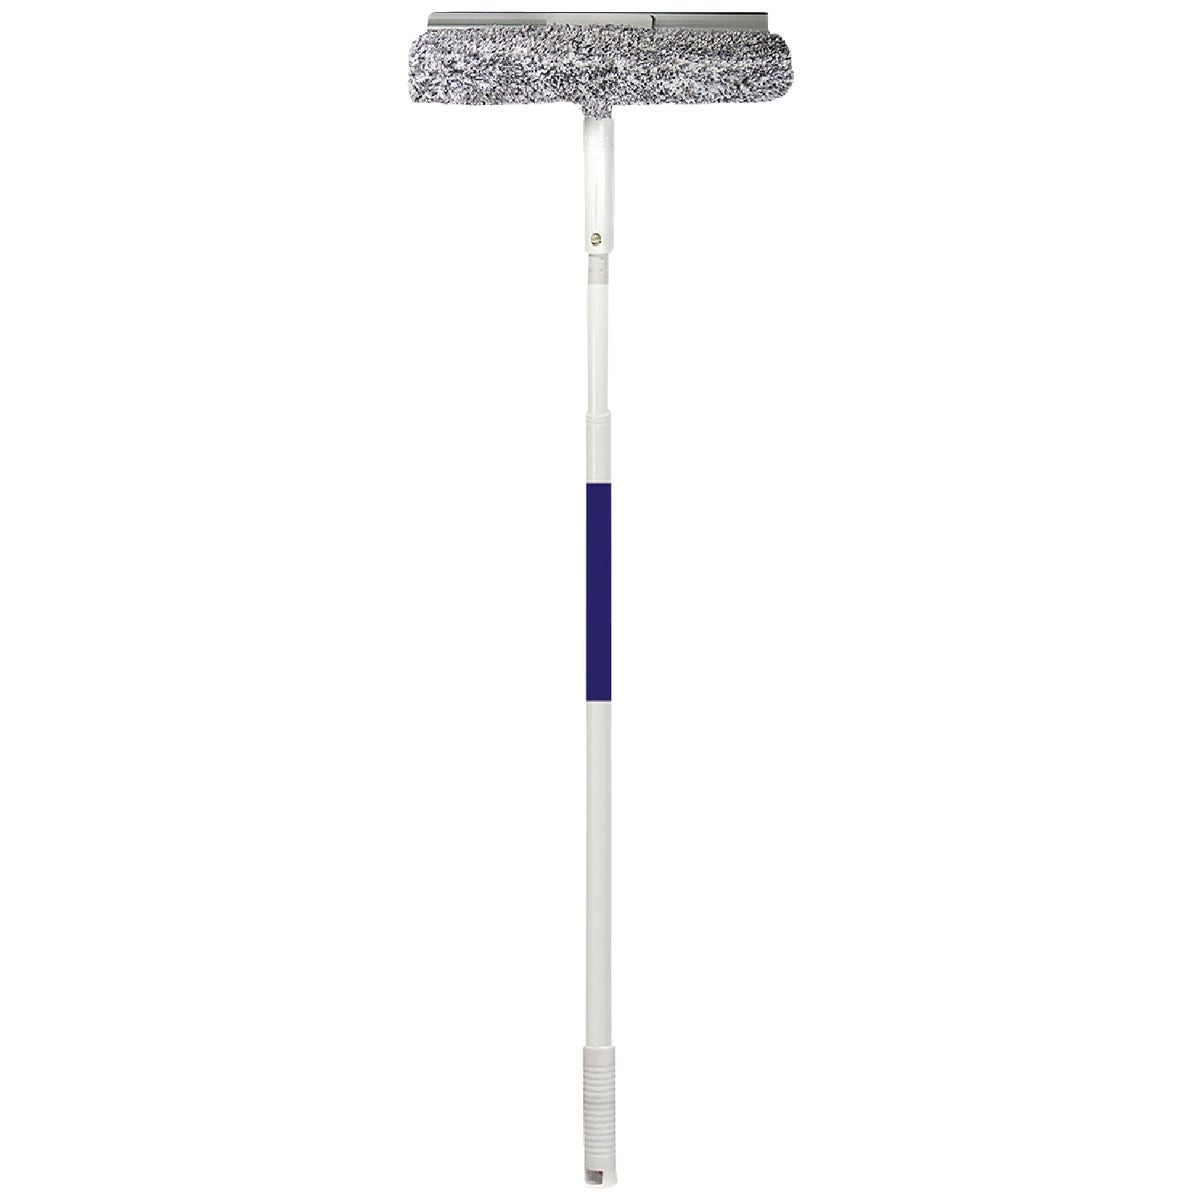 Unger 12 In. Outdoor Window Squeegee and Scrubber Kit